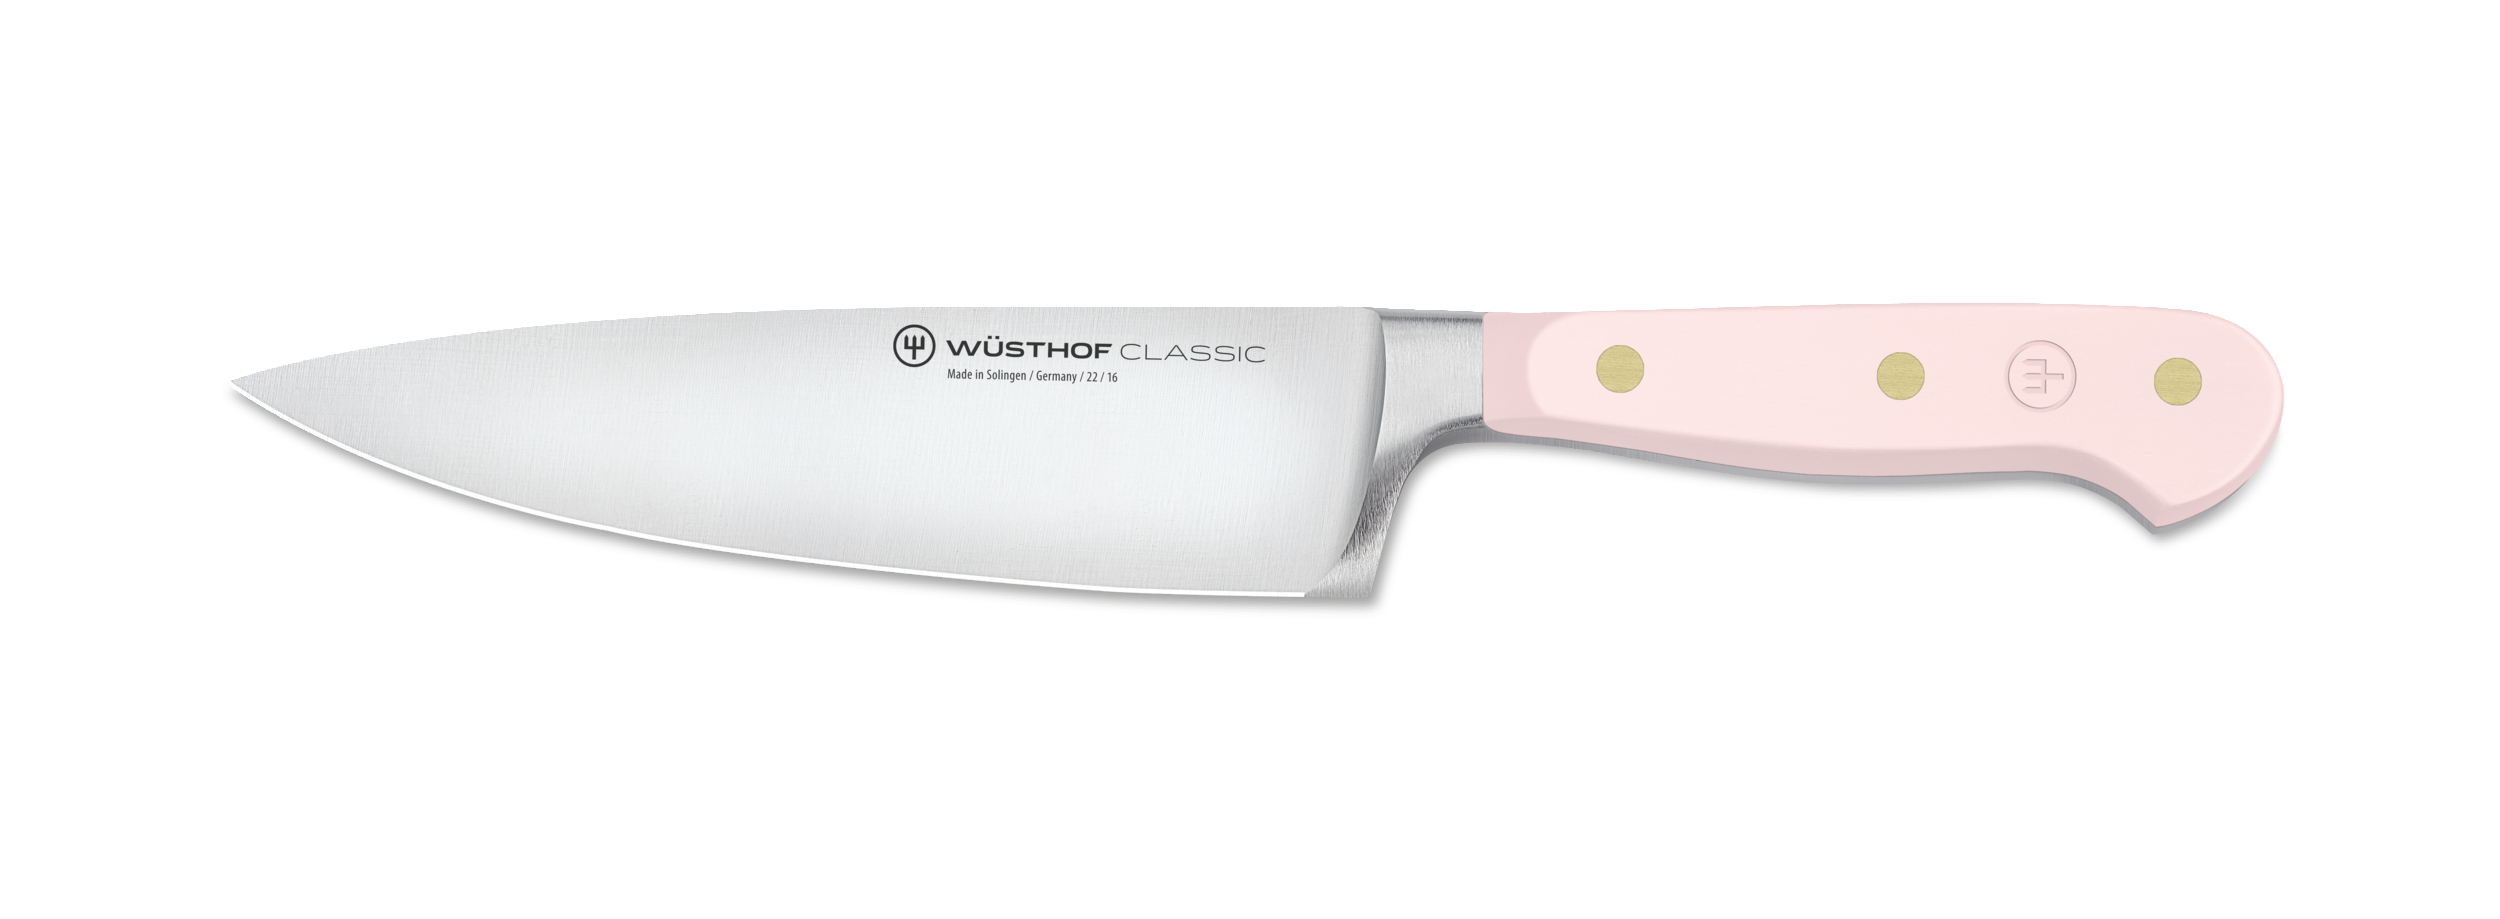 Wüsthof-Trident 4582/16 6 Cook's Knife - Classic